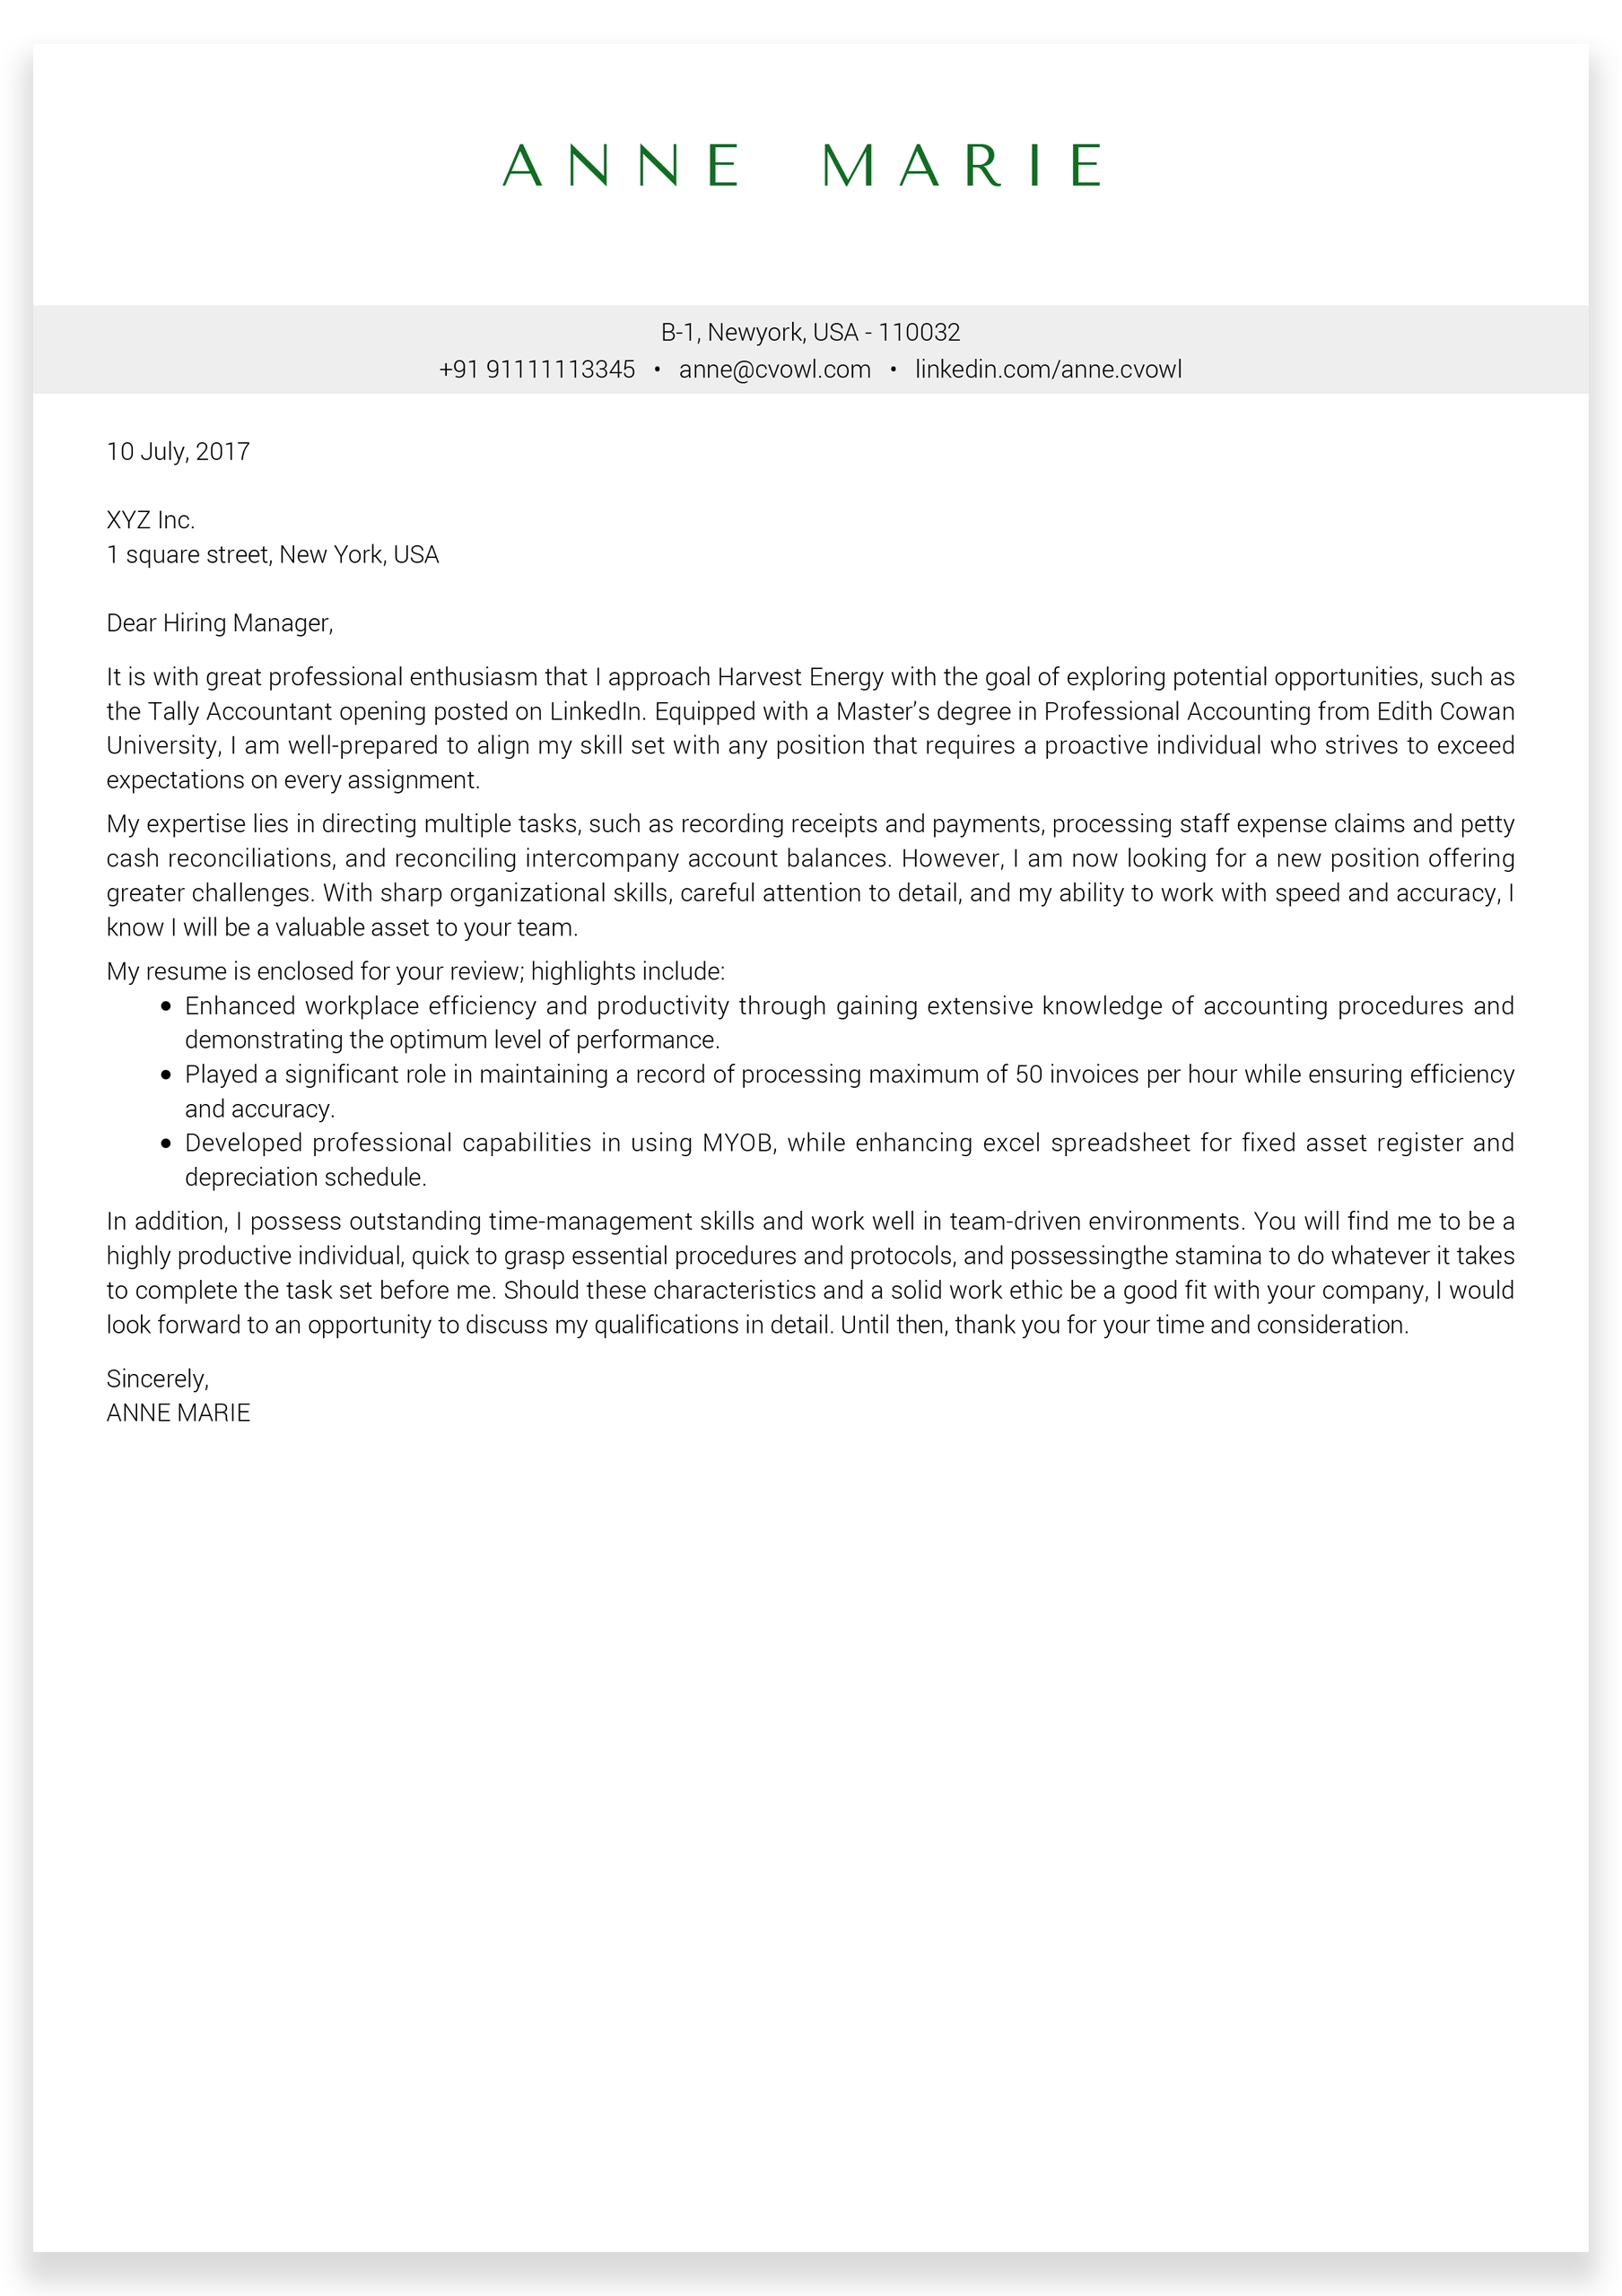 Sap-Fico-Consultant-Cover-Letter-sample5